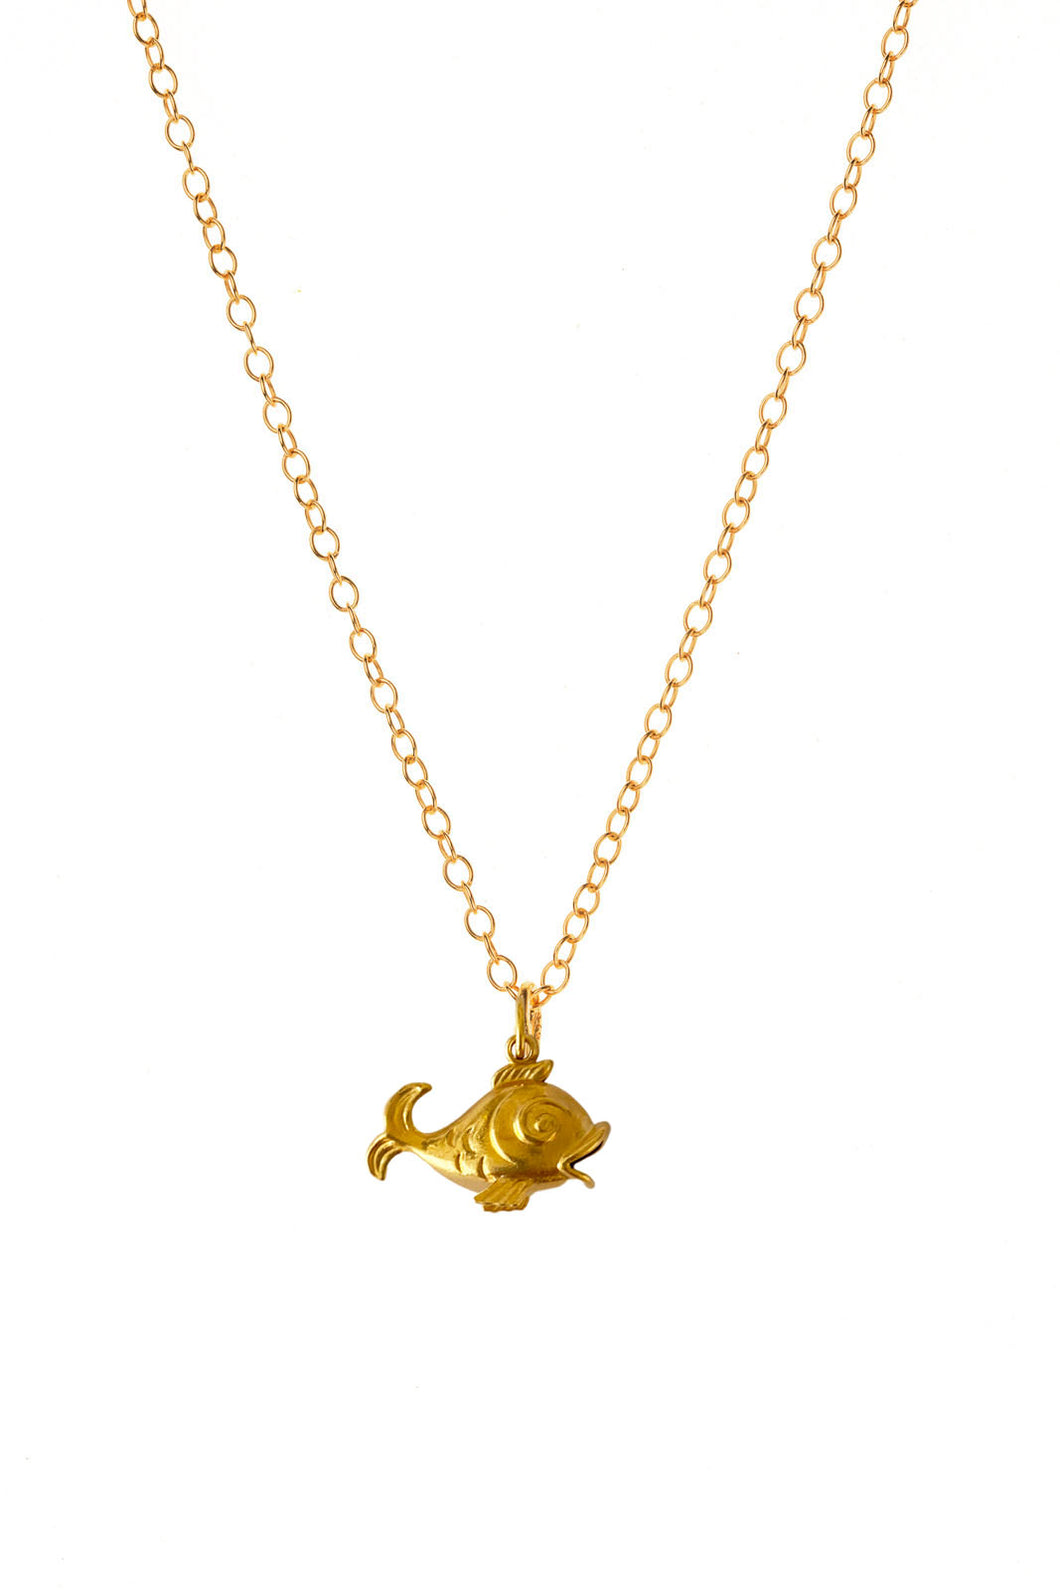 Gold Puffer Fish Charm Necklace